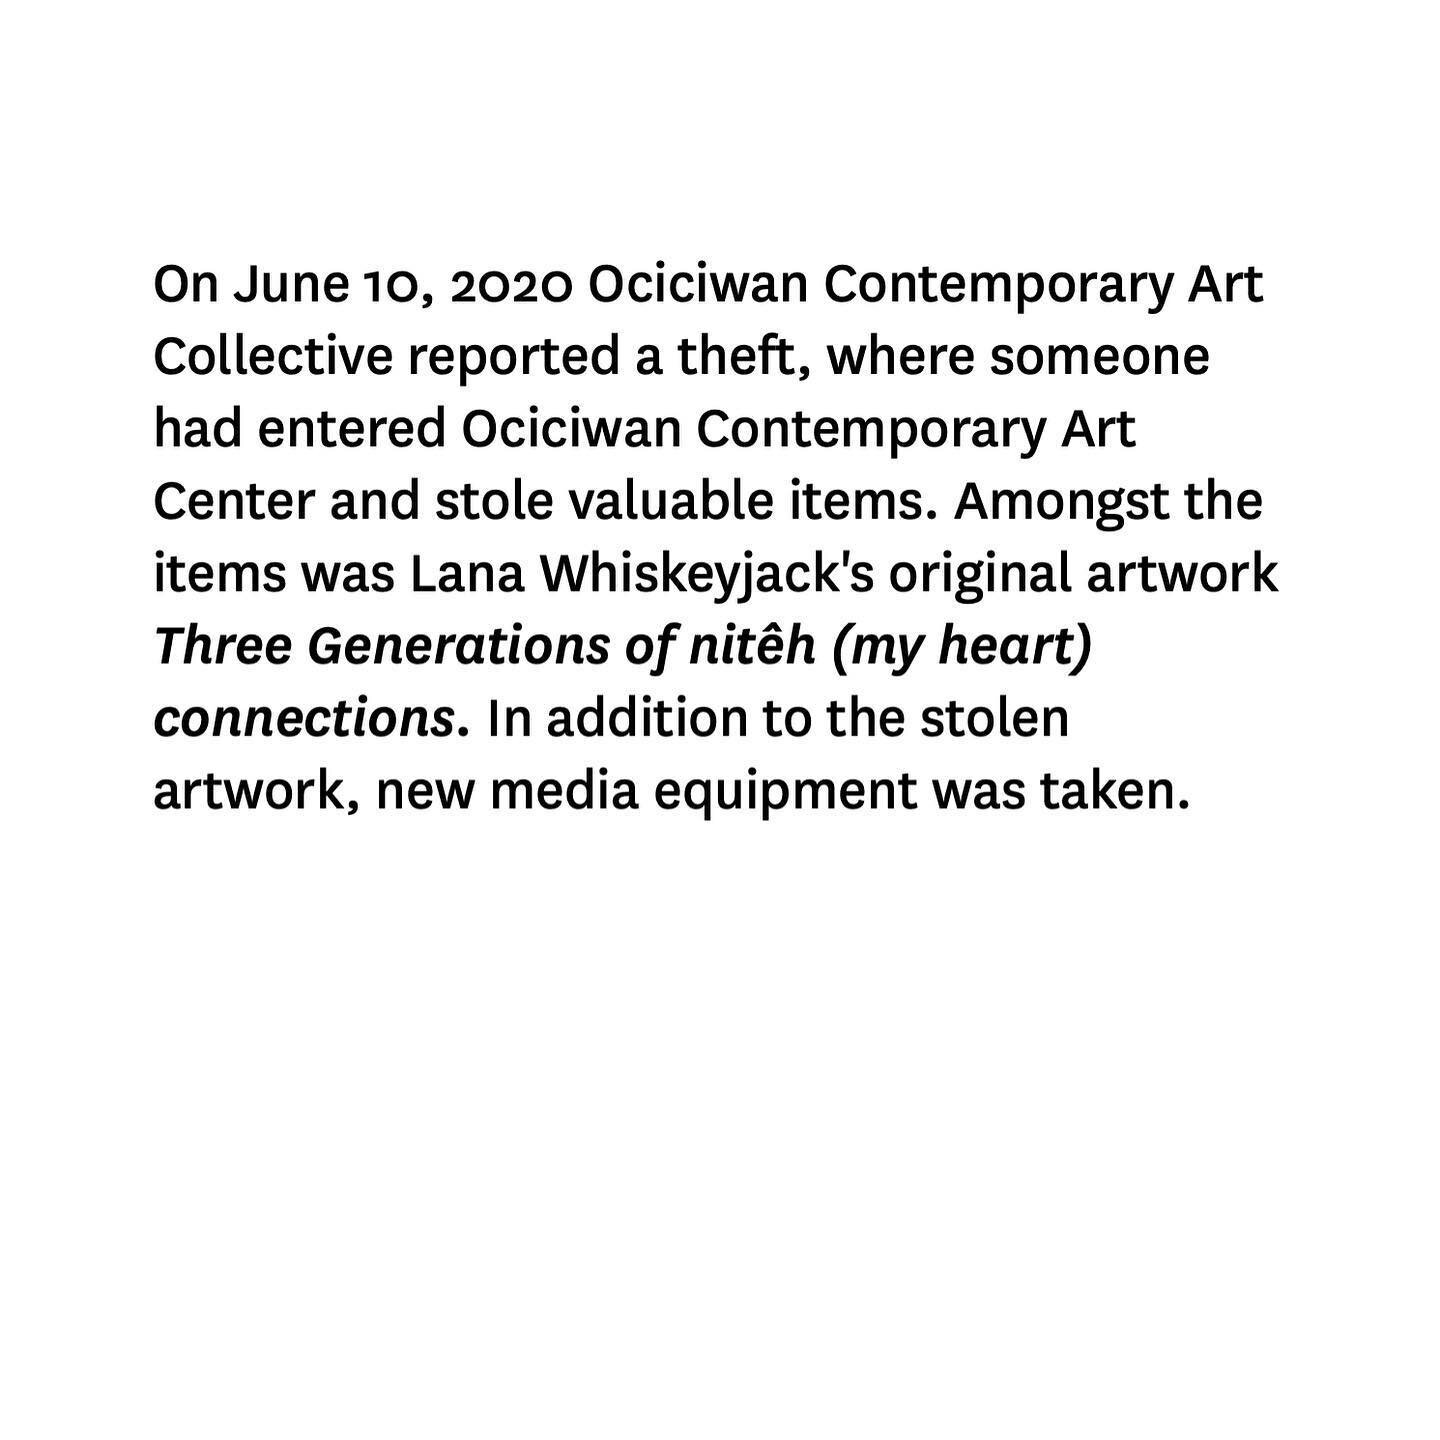 On June 10, 2020 Ociciwan Contemporary Art Collective reported a theft, where someone had entered Ociciwan Contemporary Art Center and stole valuable items. Amongst the items was Lana Whiskeyjack's original artwork Three Generations of nitêh (my hea